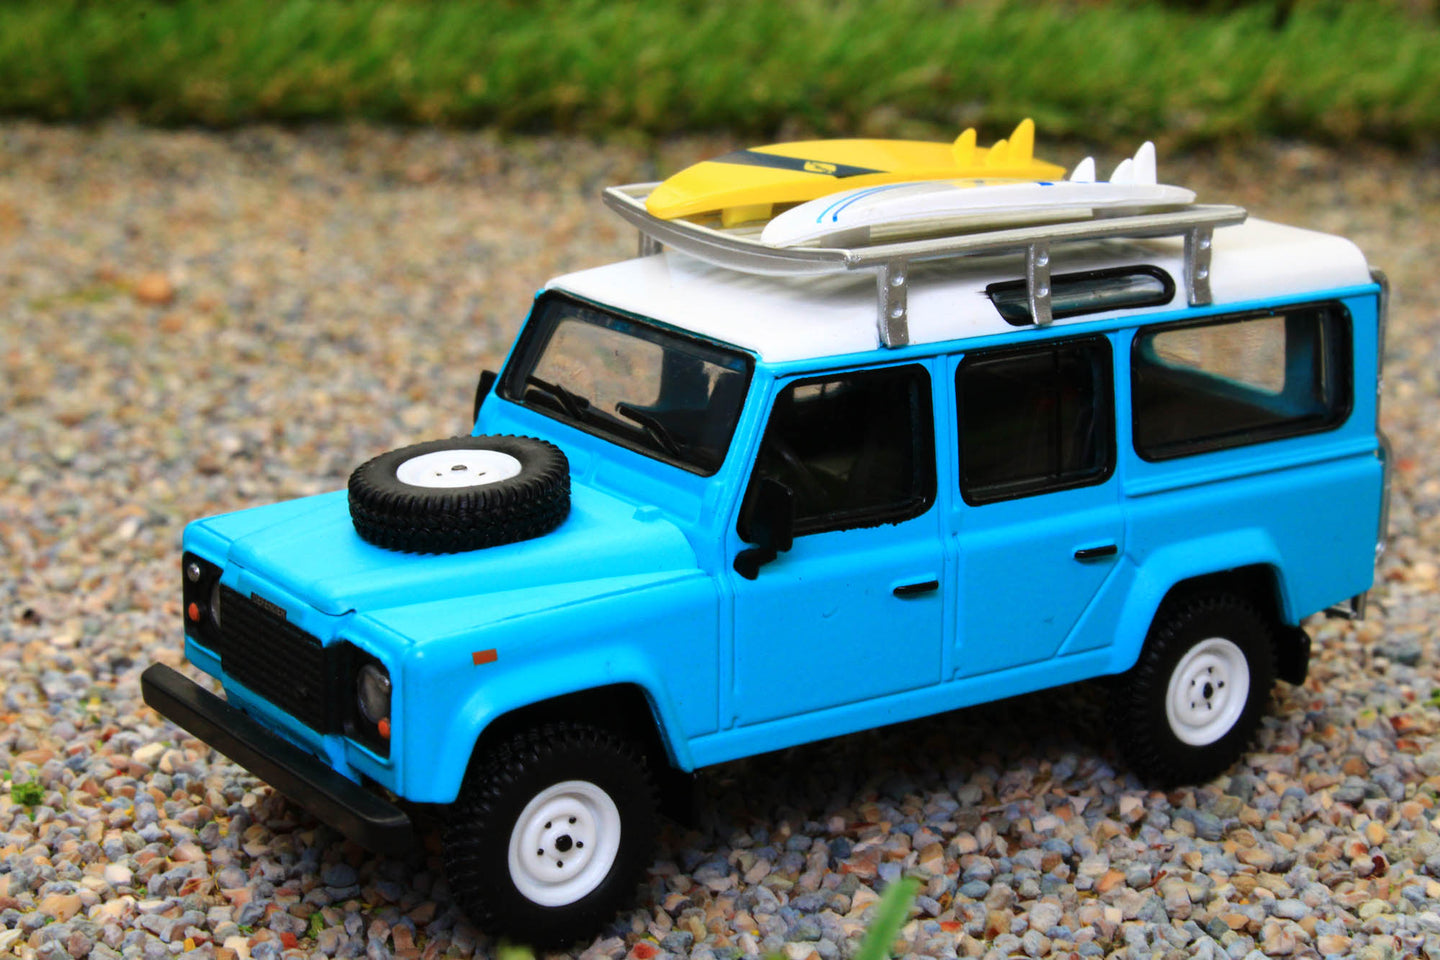 TSMMGT00109L MINI GT MODELS 1:64 SCALE Land Rover Defender 110 Light Blue with Surfboard